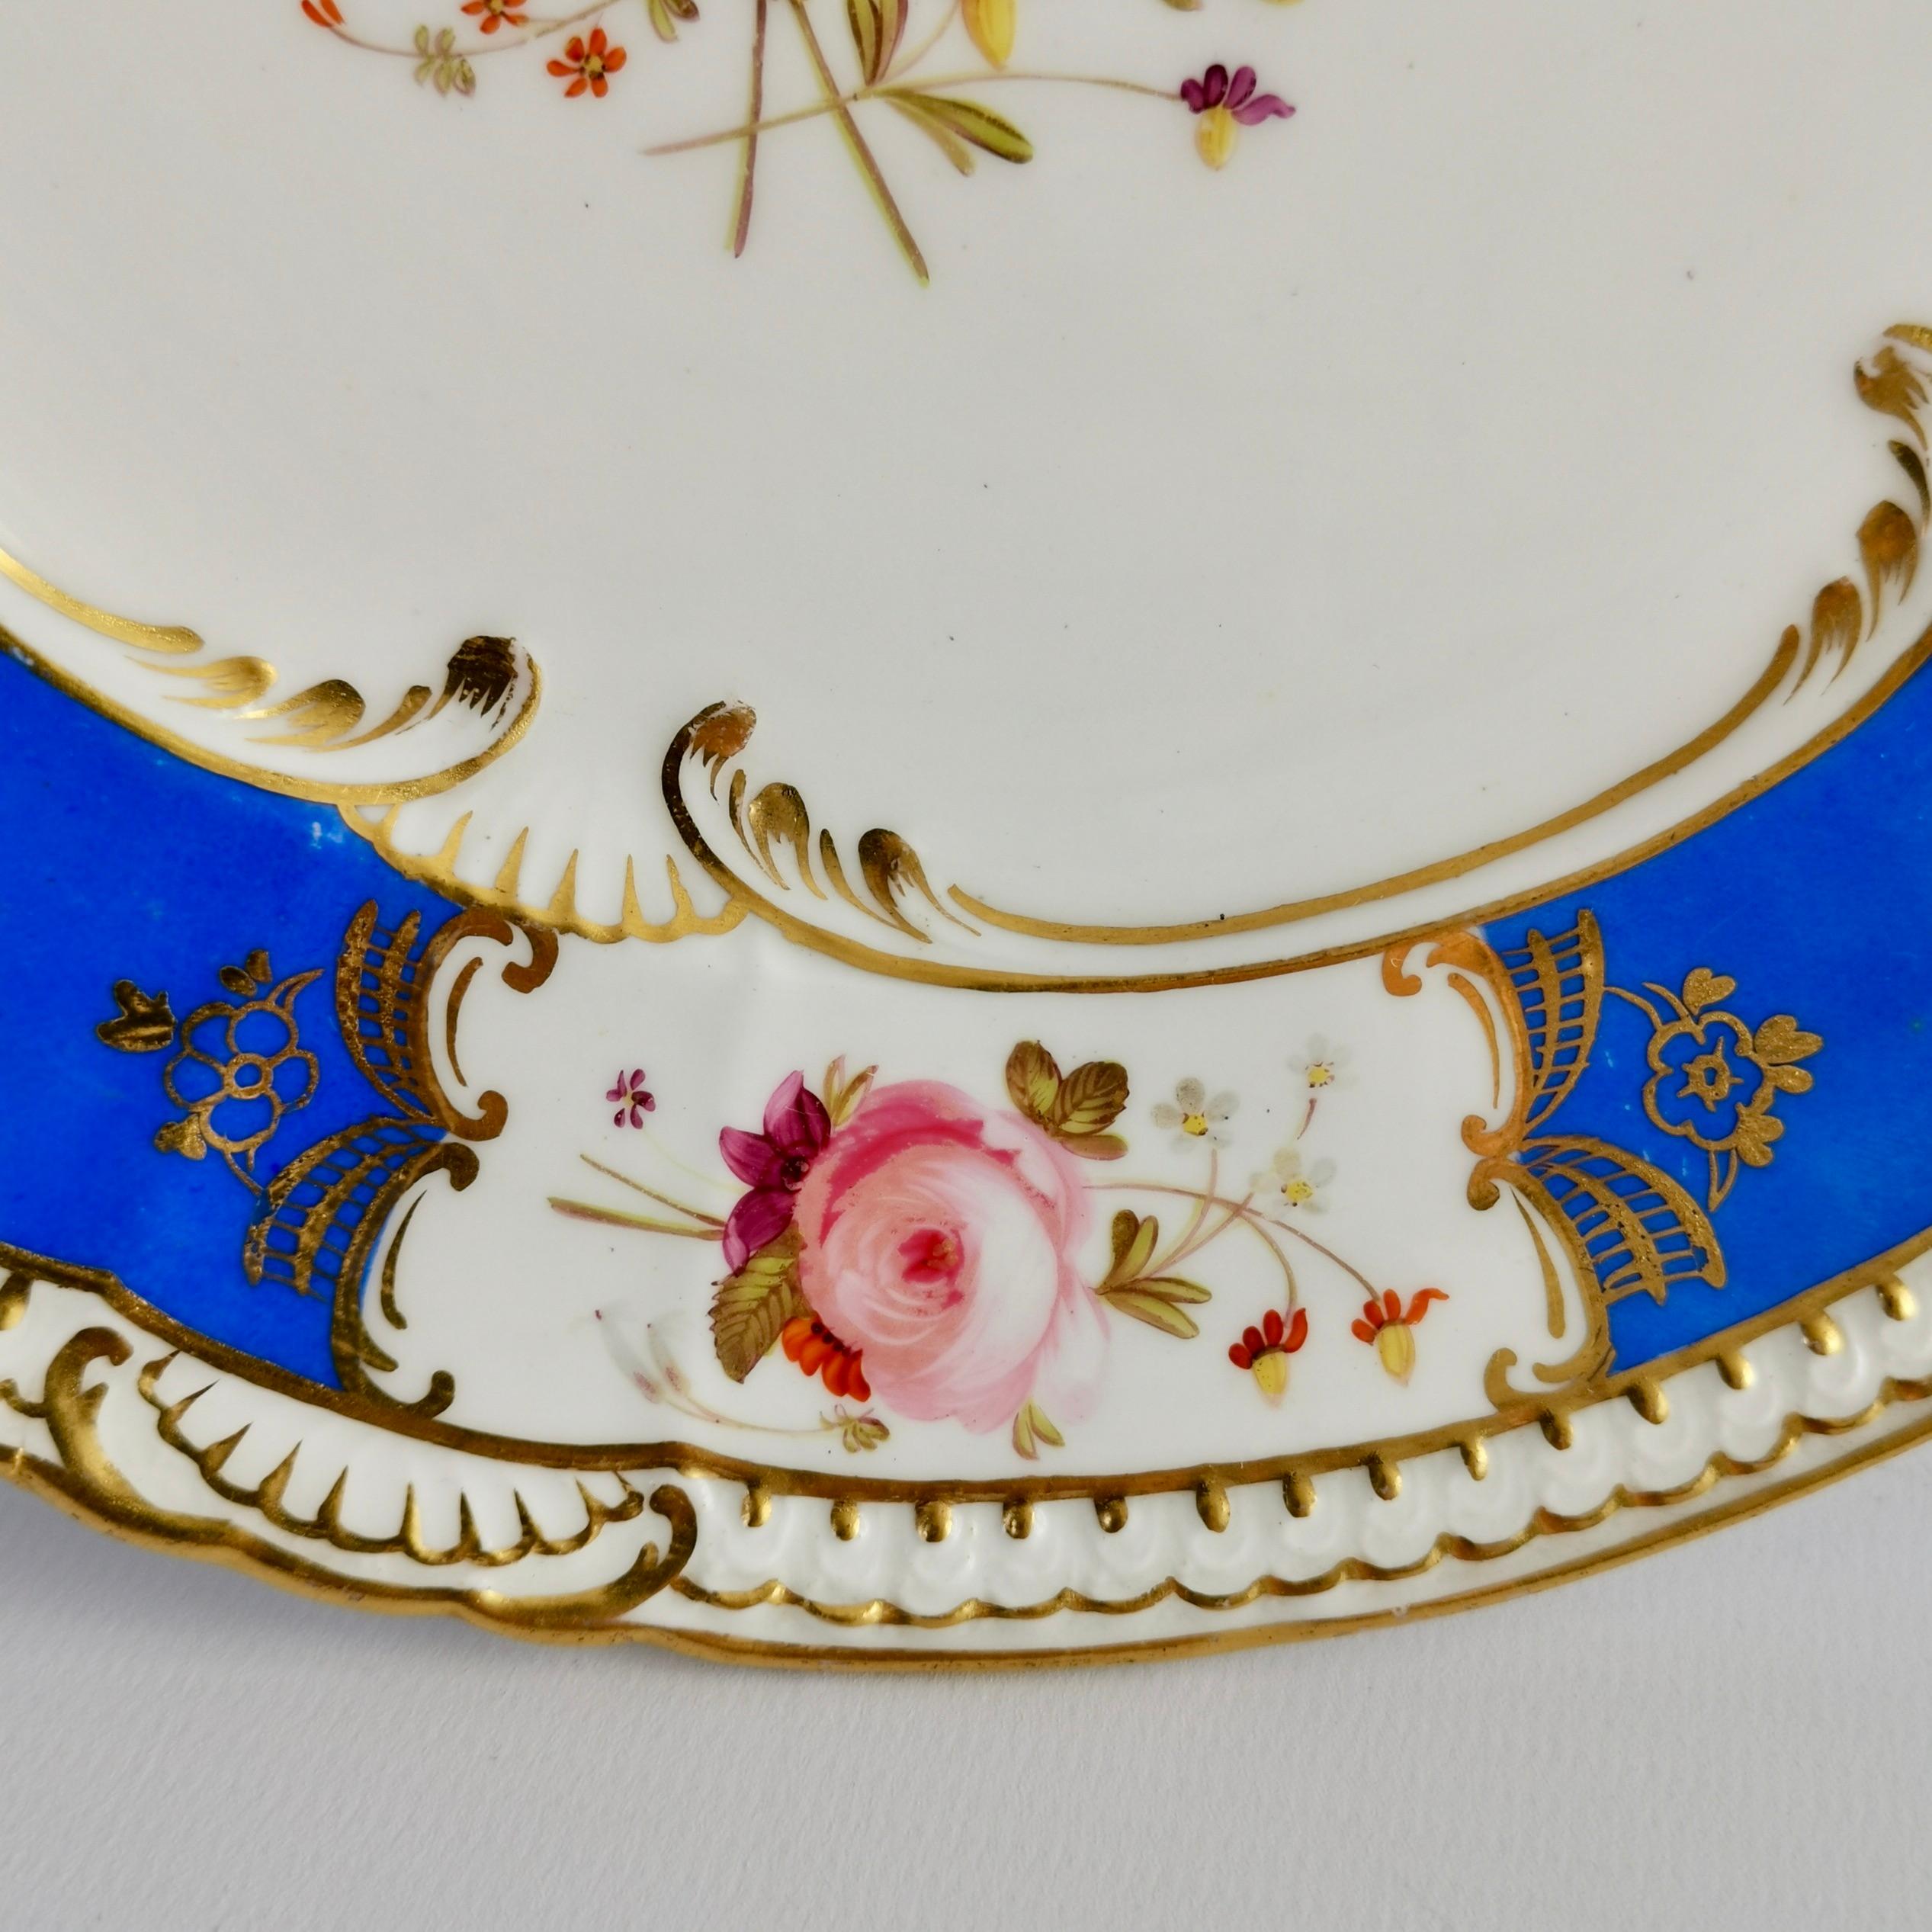 English Coalport Porcelain Plate, Blue with Hand Painted Flowers, Regency 1827